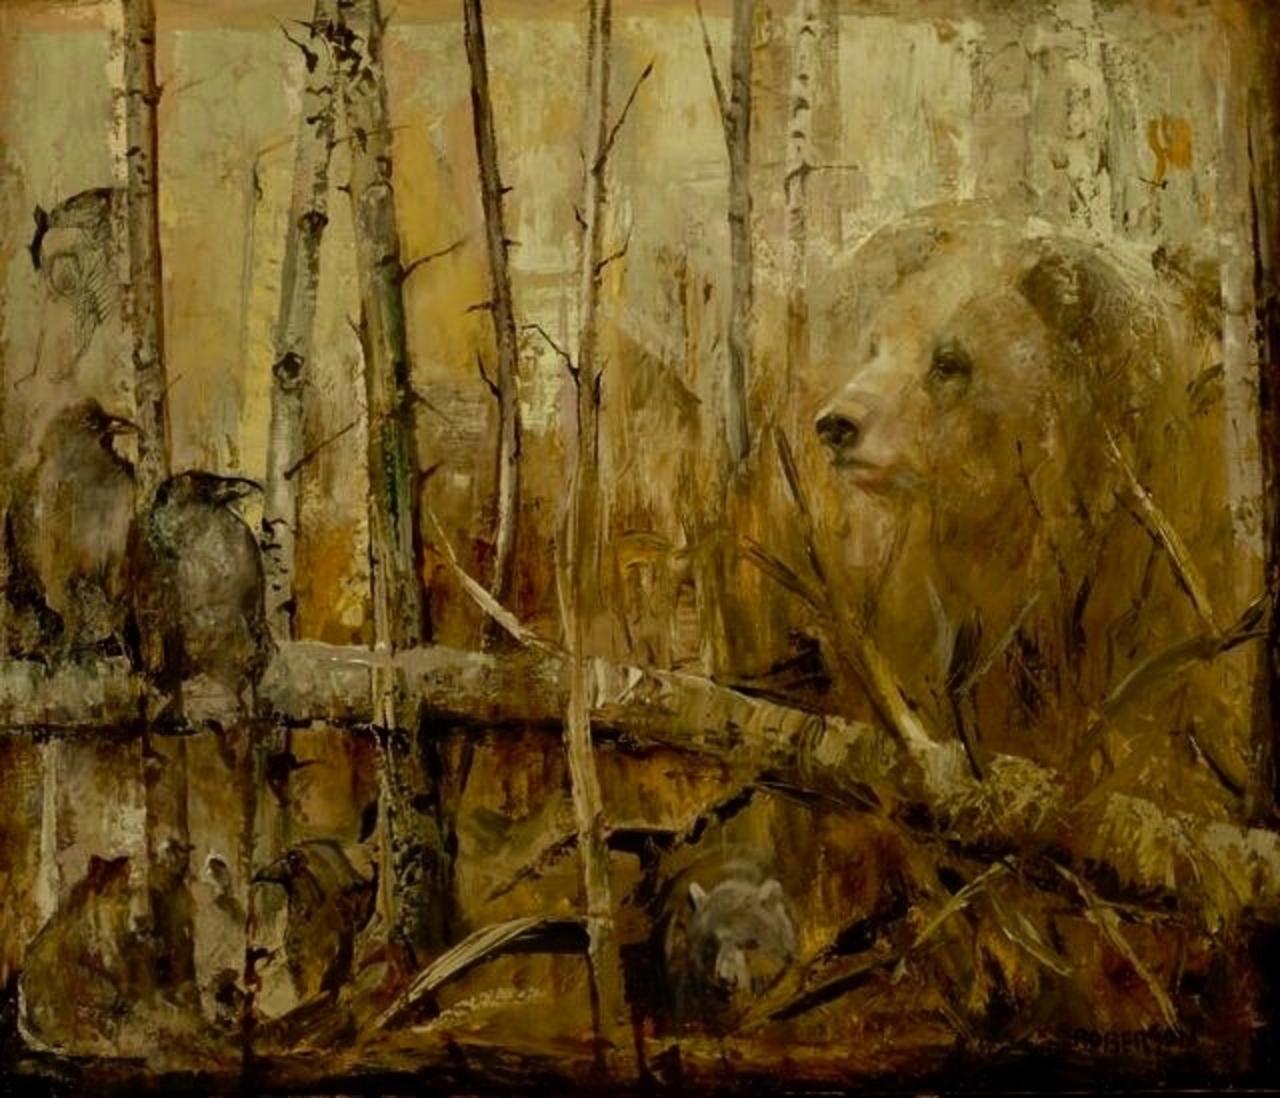 "Earth Bear" by Mary Roberson. Roberson is regarded as one of the most talented contemporary wildife artists in America. This image used with her permission. To learn more about her work, go to maryroberson.com